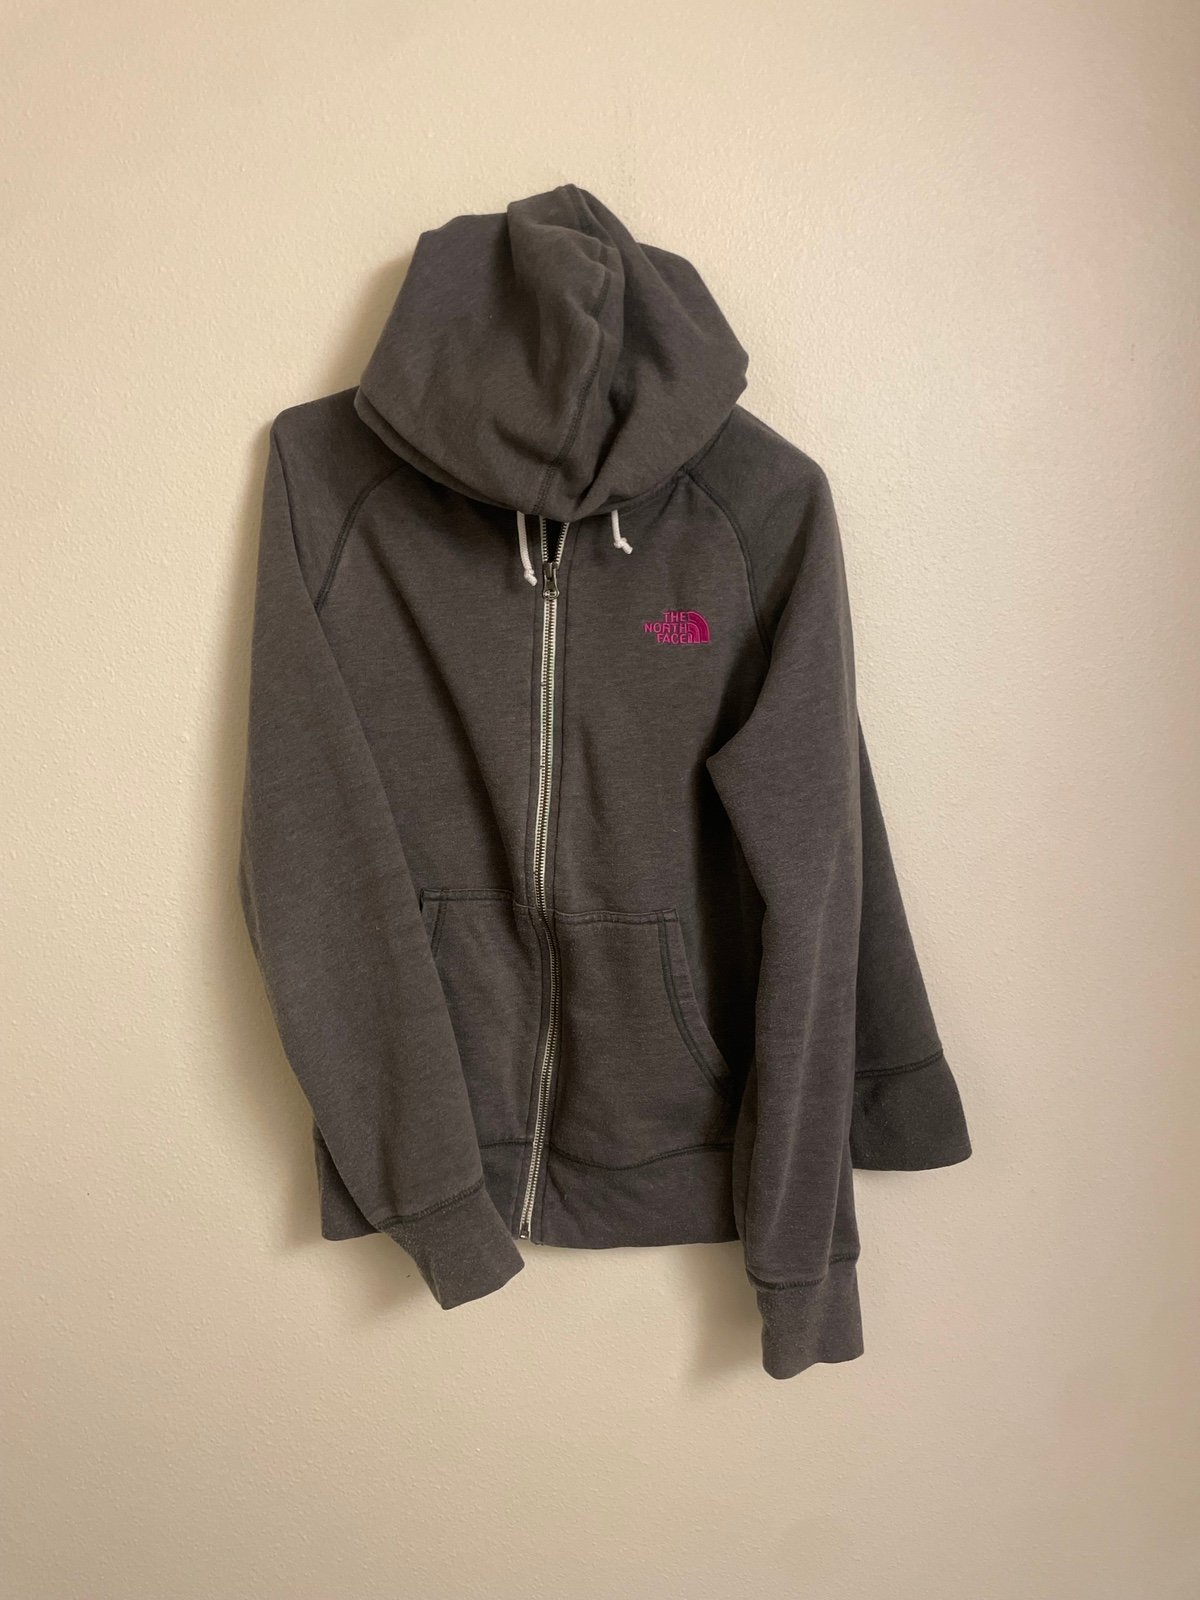 Promotions  The north face sweatshirt size XL NkiRFGLdM